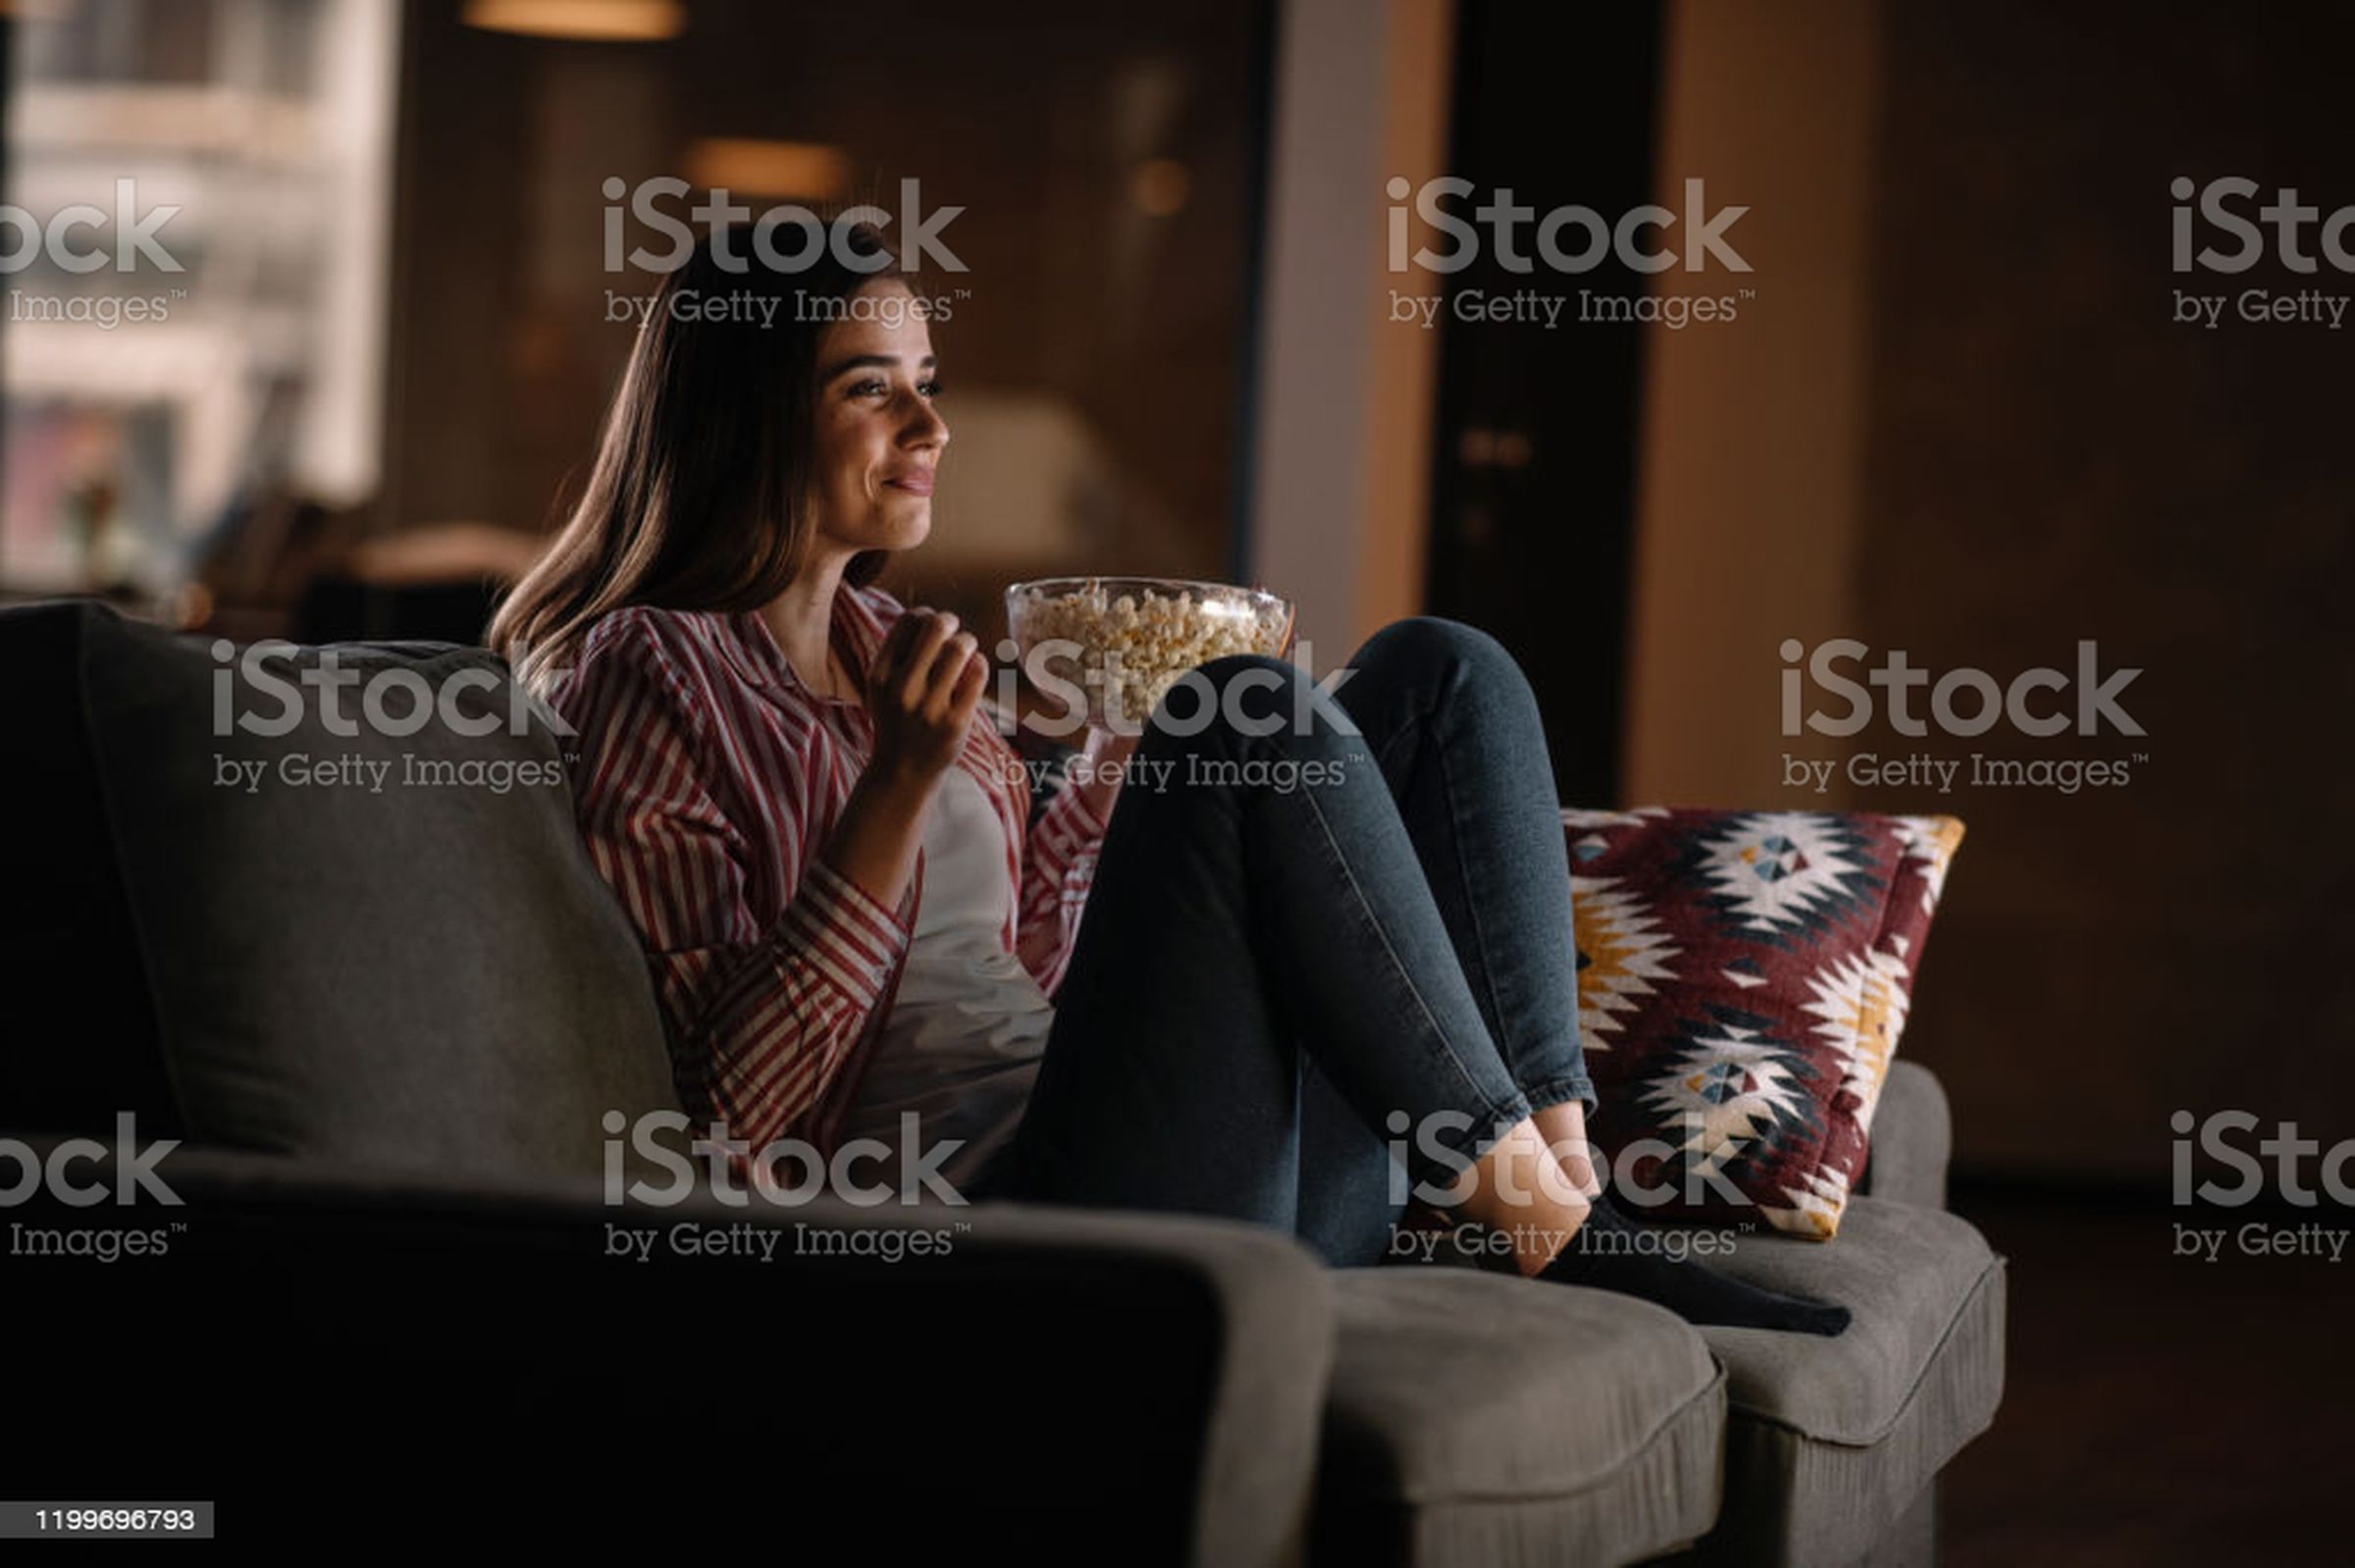 “Girl on the sofa in the living room eating popcorn”